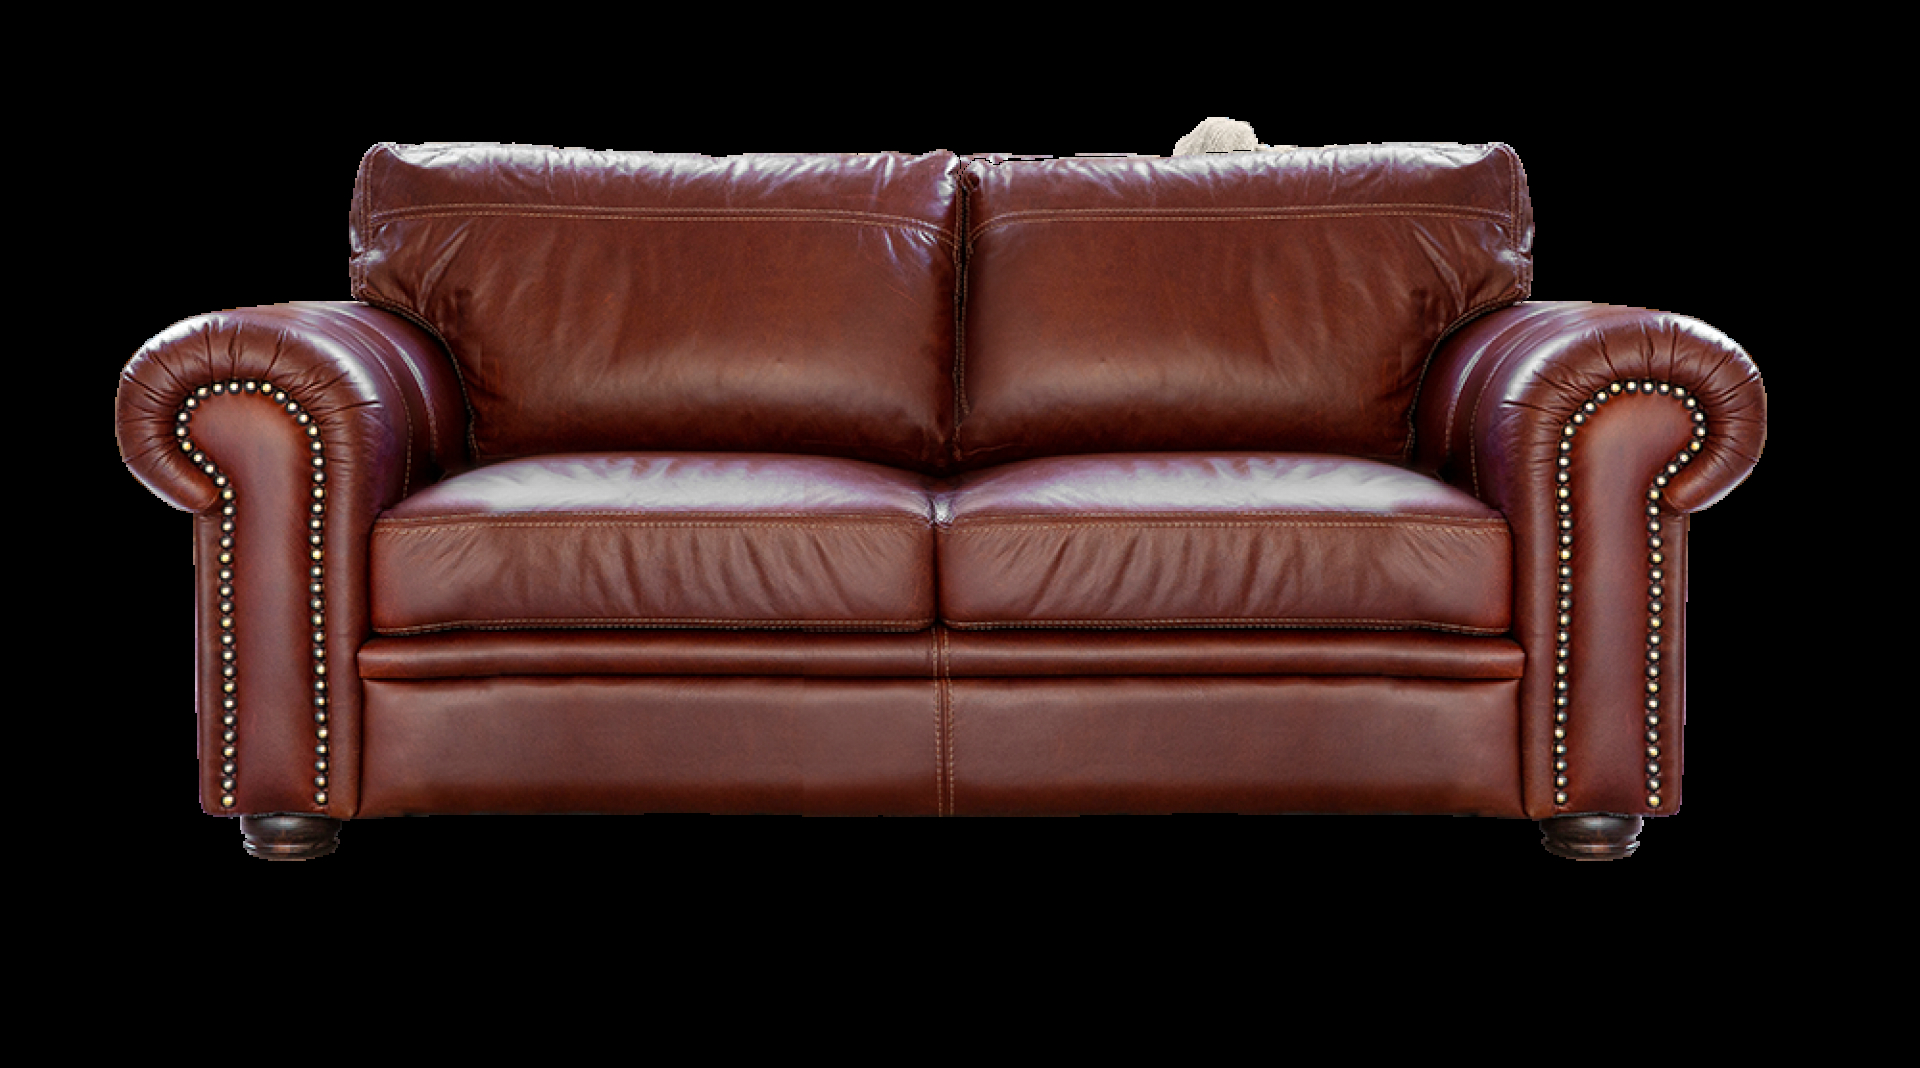 leather sofa prices in south africa